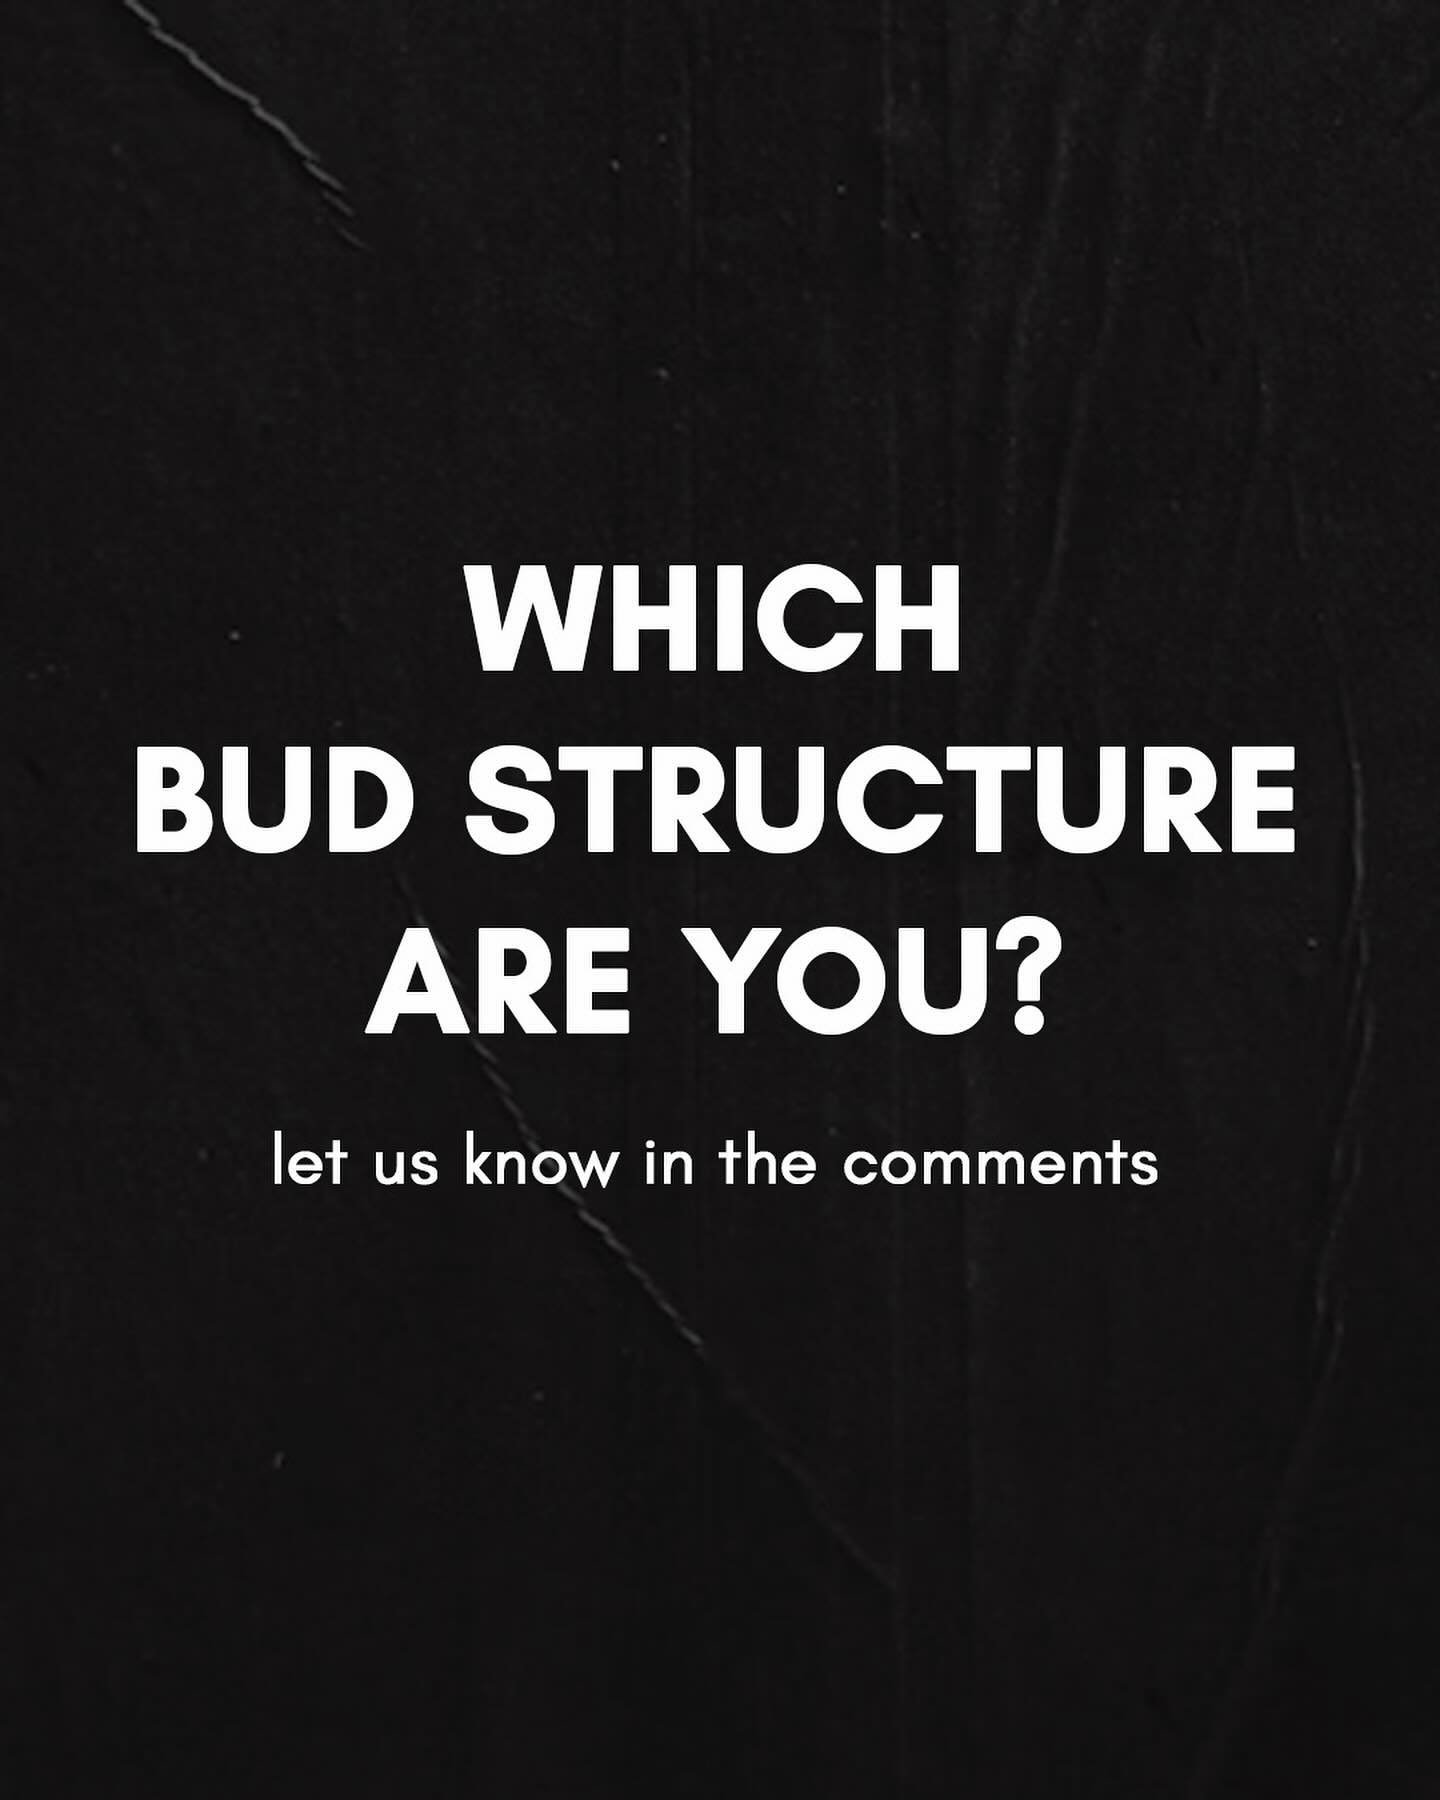 Which bud structure are you picking ? 👀🌿

#bud #structure #whichoneareyou #goodgrades #classisinsession #qgtm💰